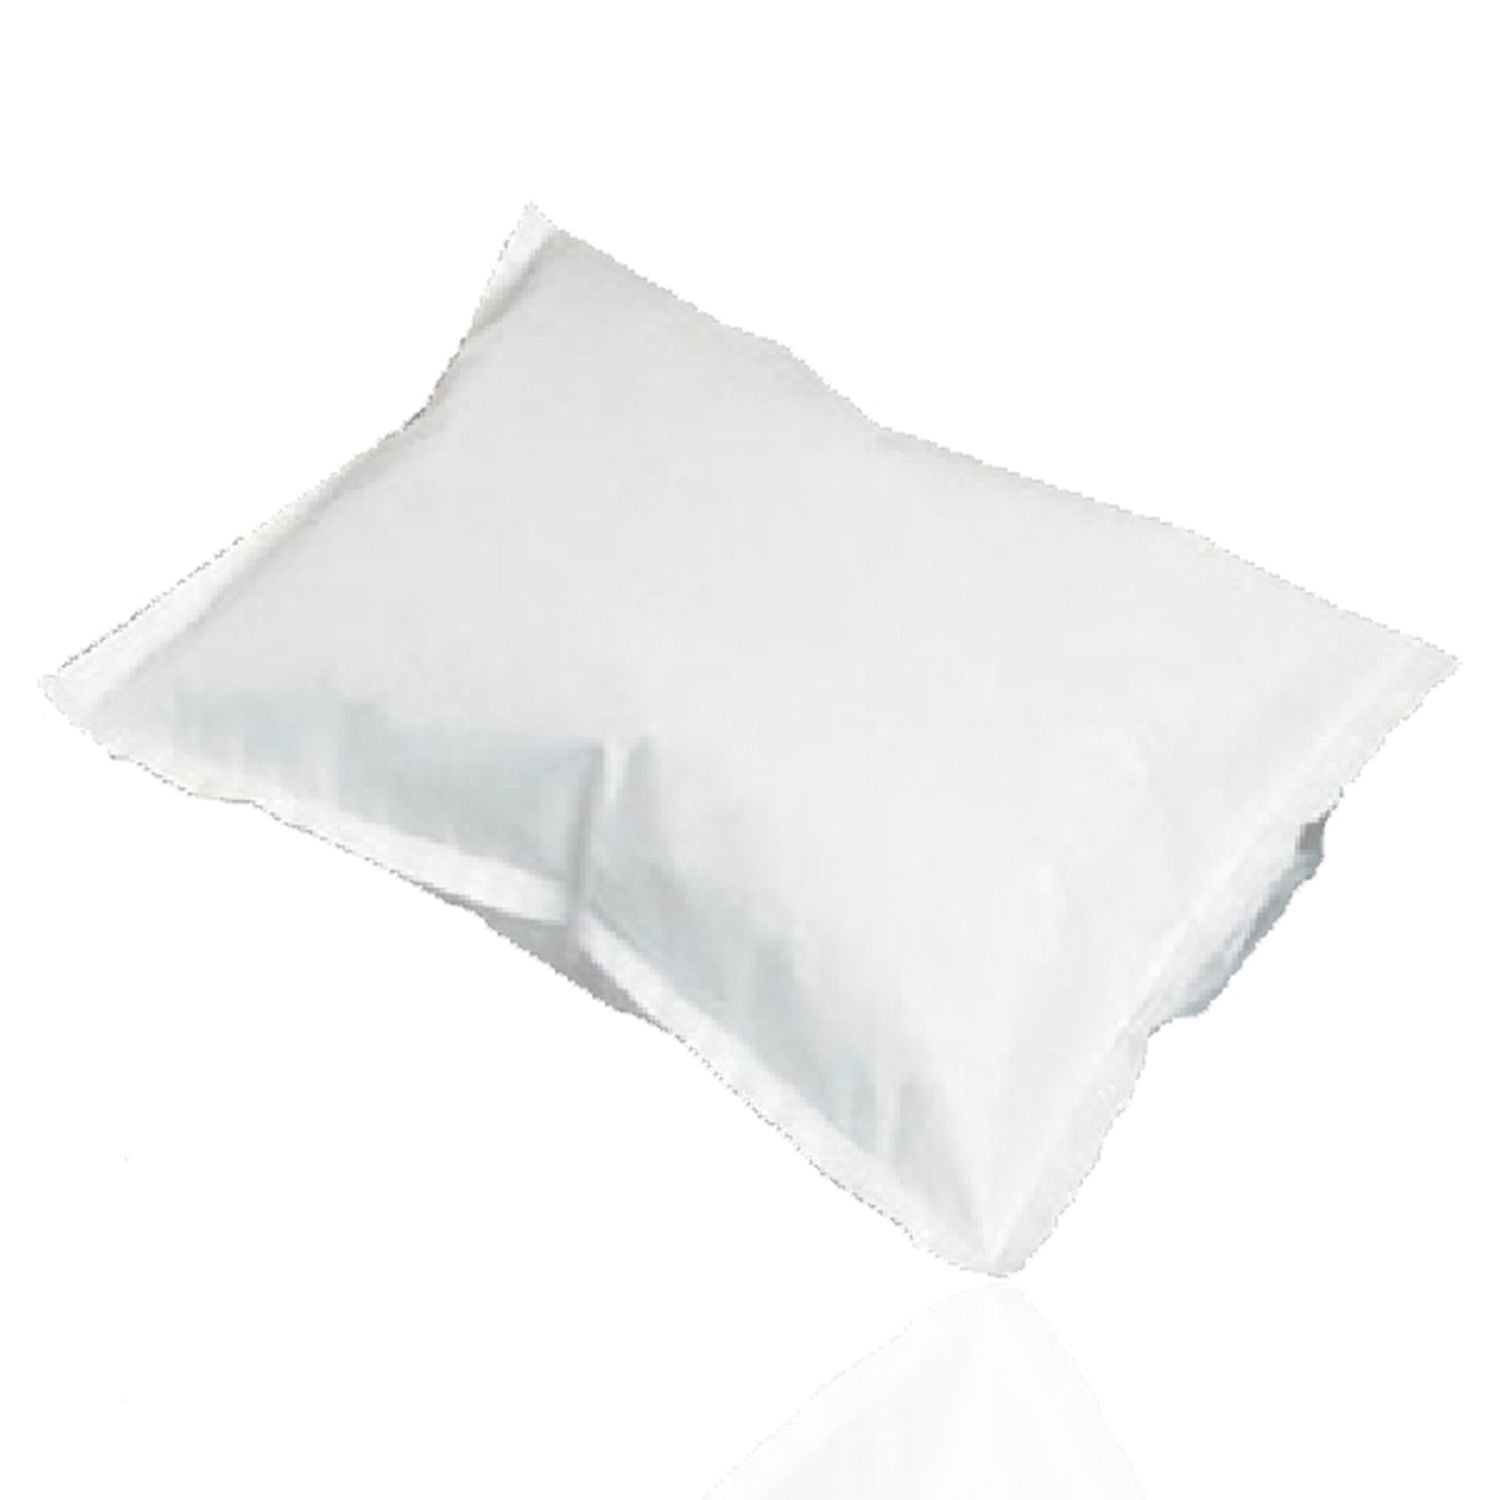 Pillowcase | Disposable | White | 76 x 51cm | Pack of 50 Pieces